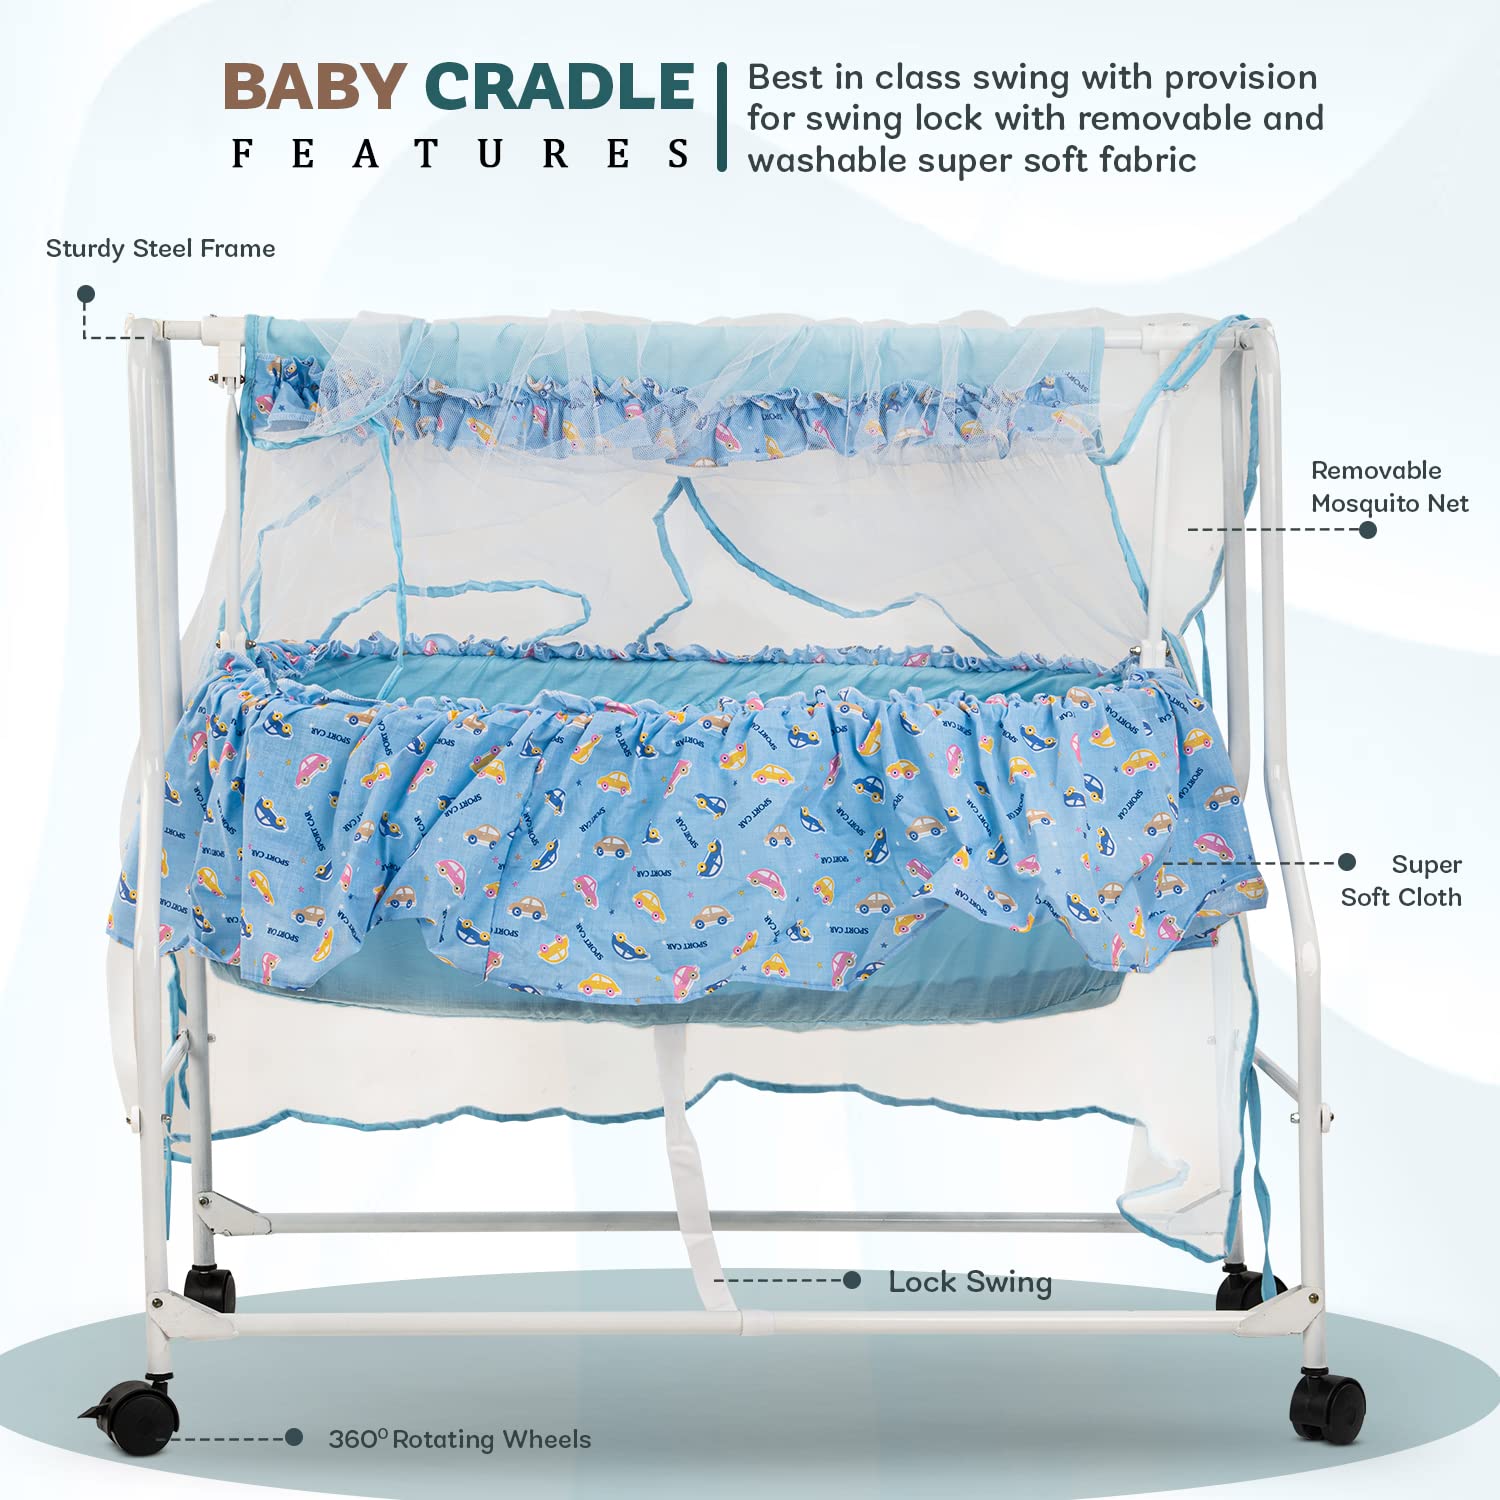 Baybee Baby Swing Cradle for Newborn Babies 0 to 12 Months (Blue)